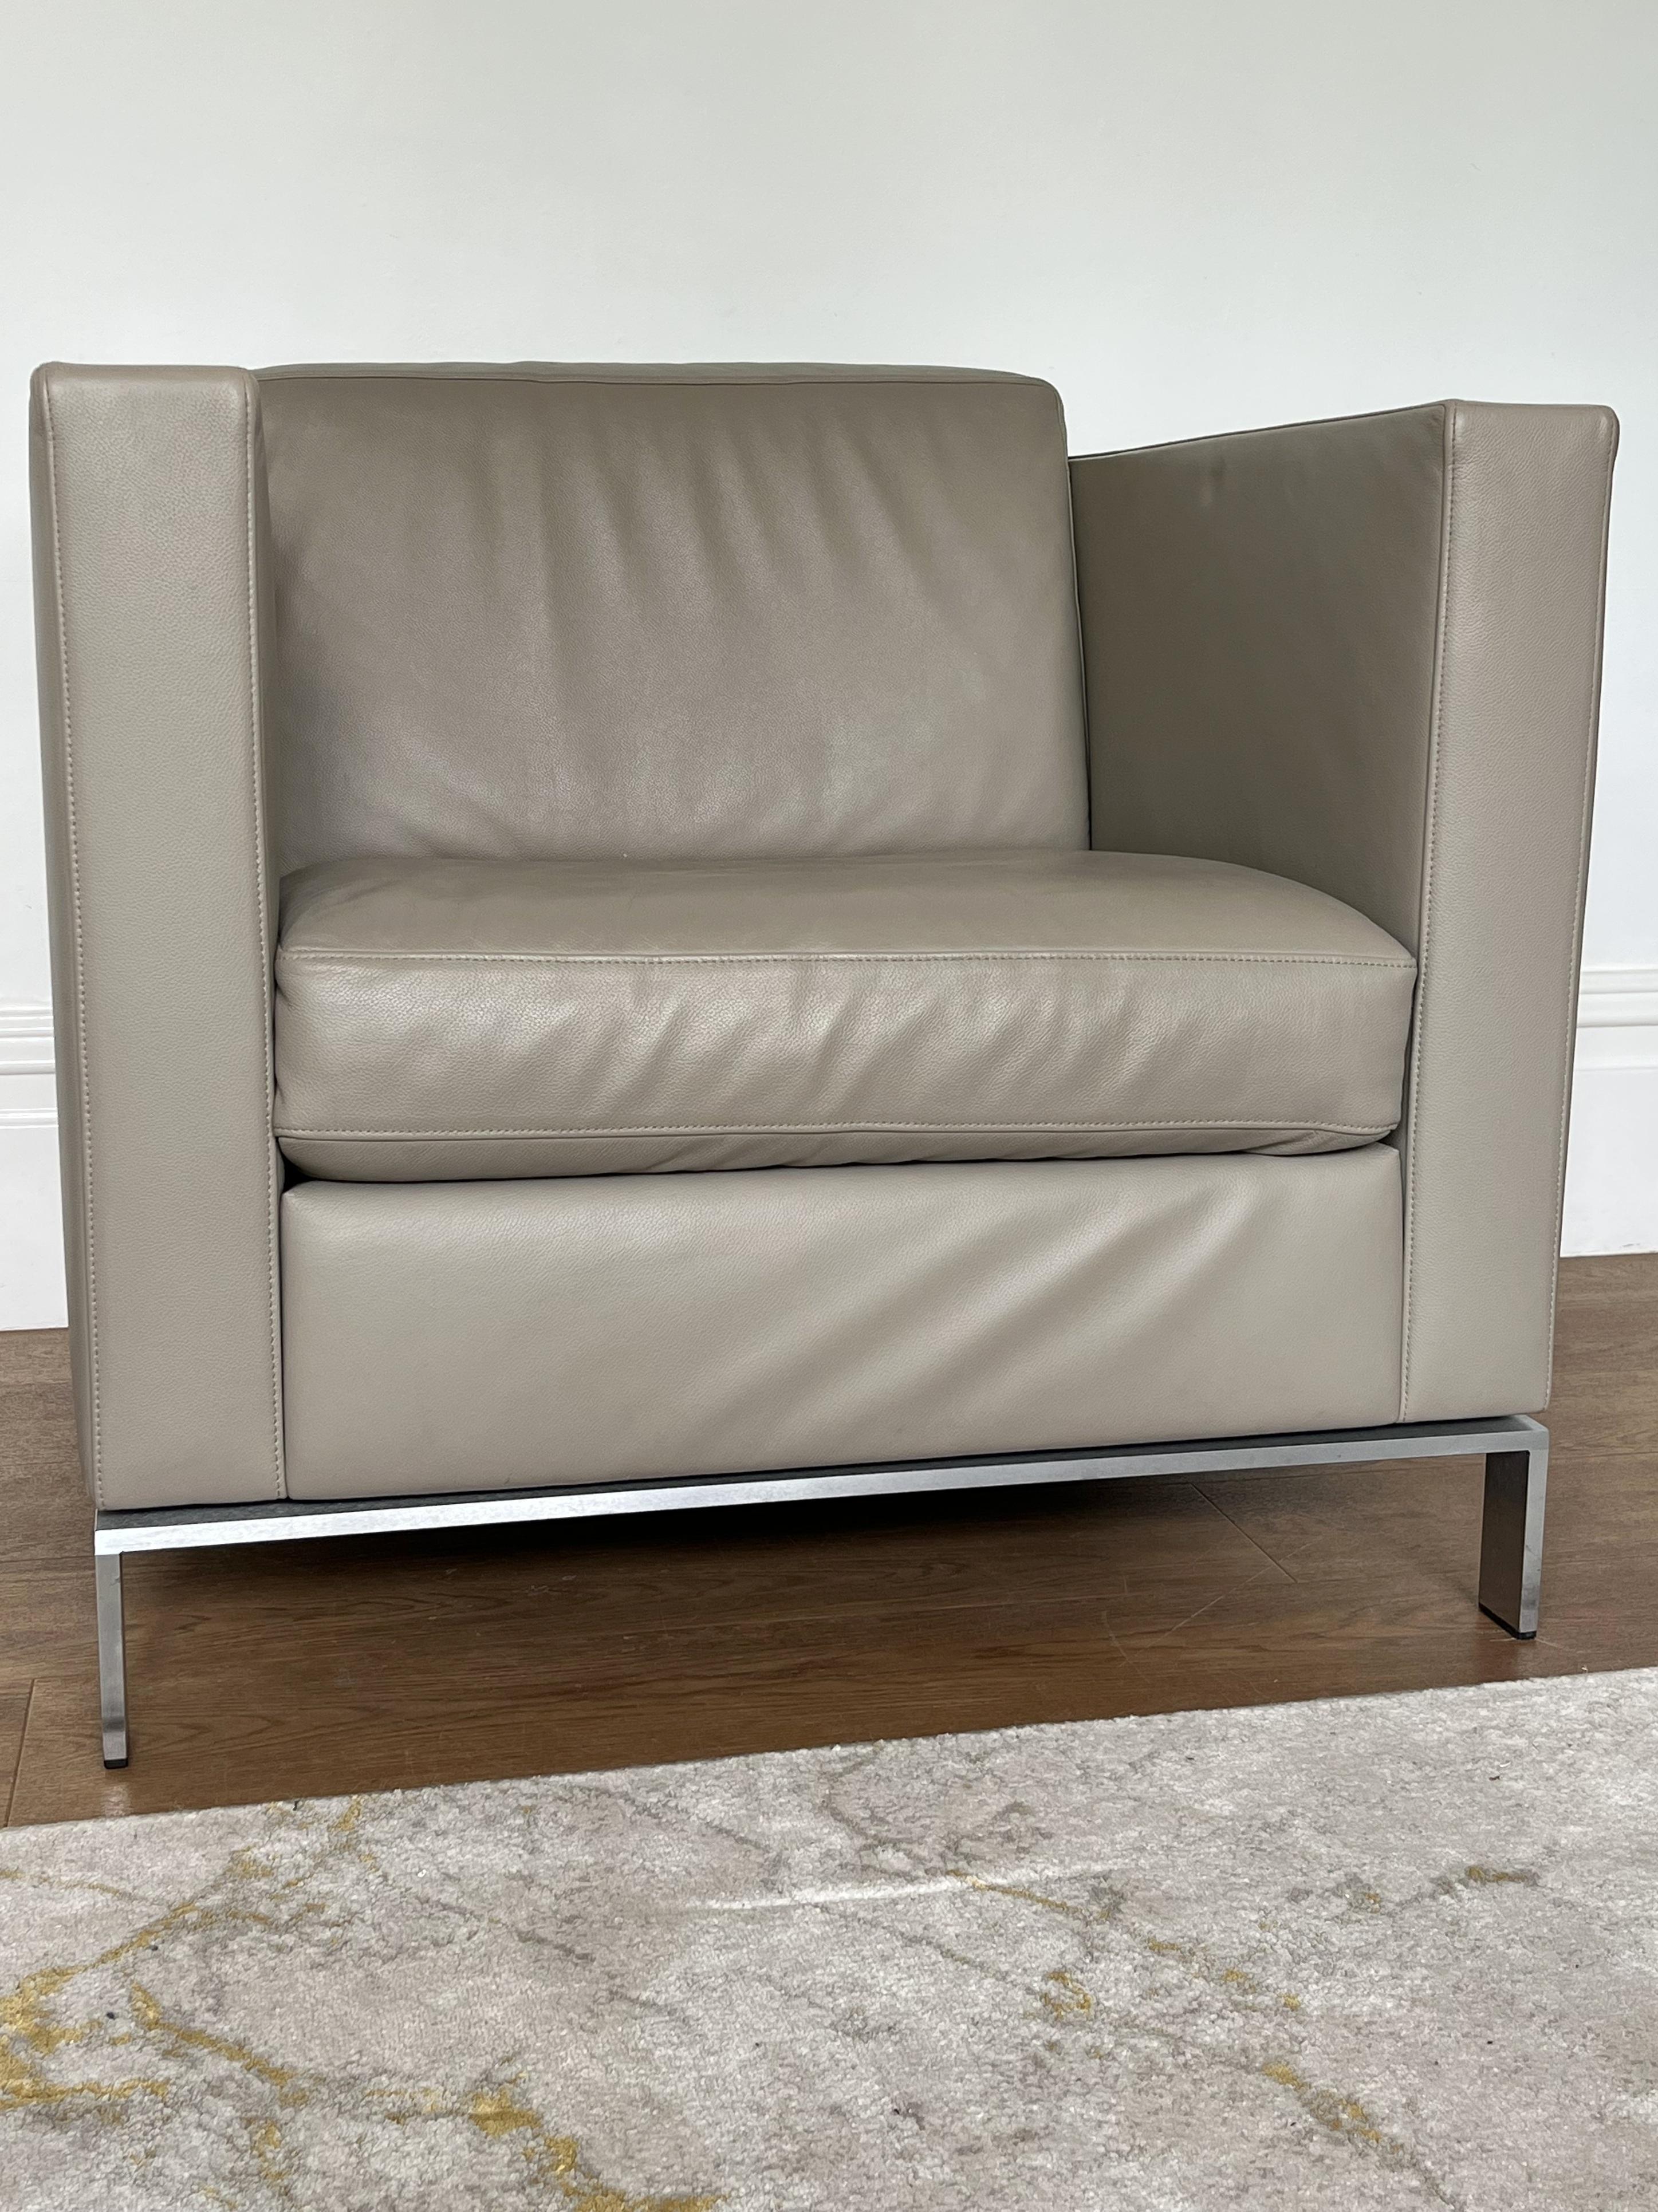 Foster 500 Chair designed by Sir Norman Foster for Walter Knoll.

The chair has taupe leather upholstery on a floating matt brushed chrome base.

The chair is in very good condition showing only usual light signs of use.

We currently have 2